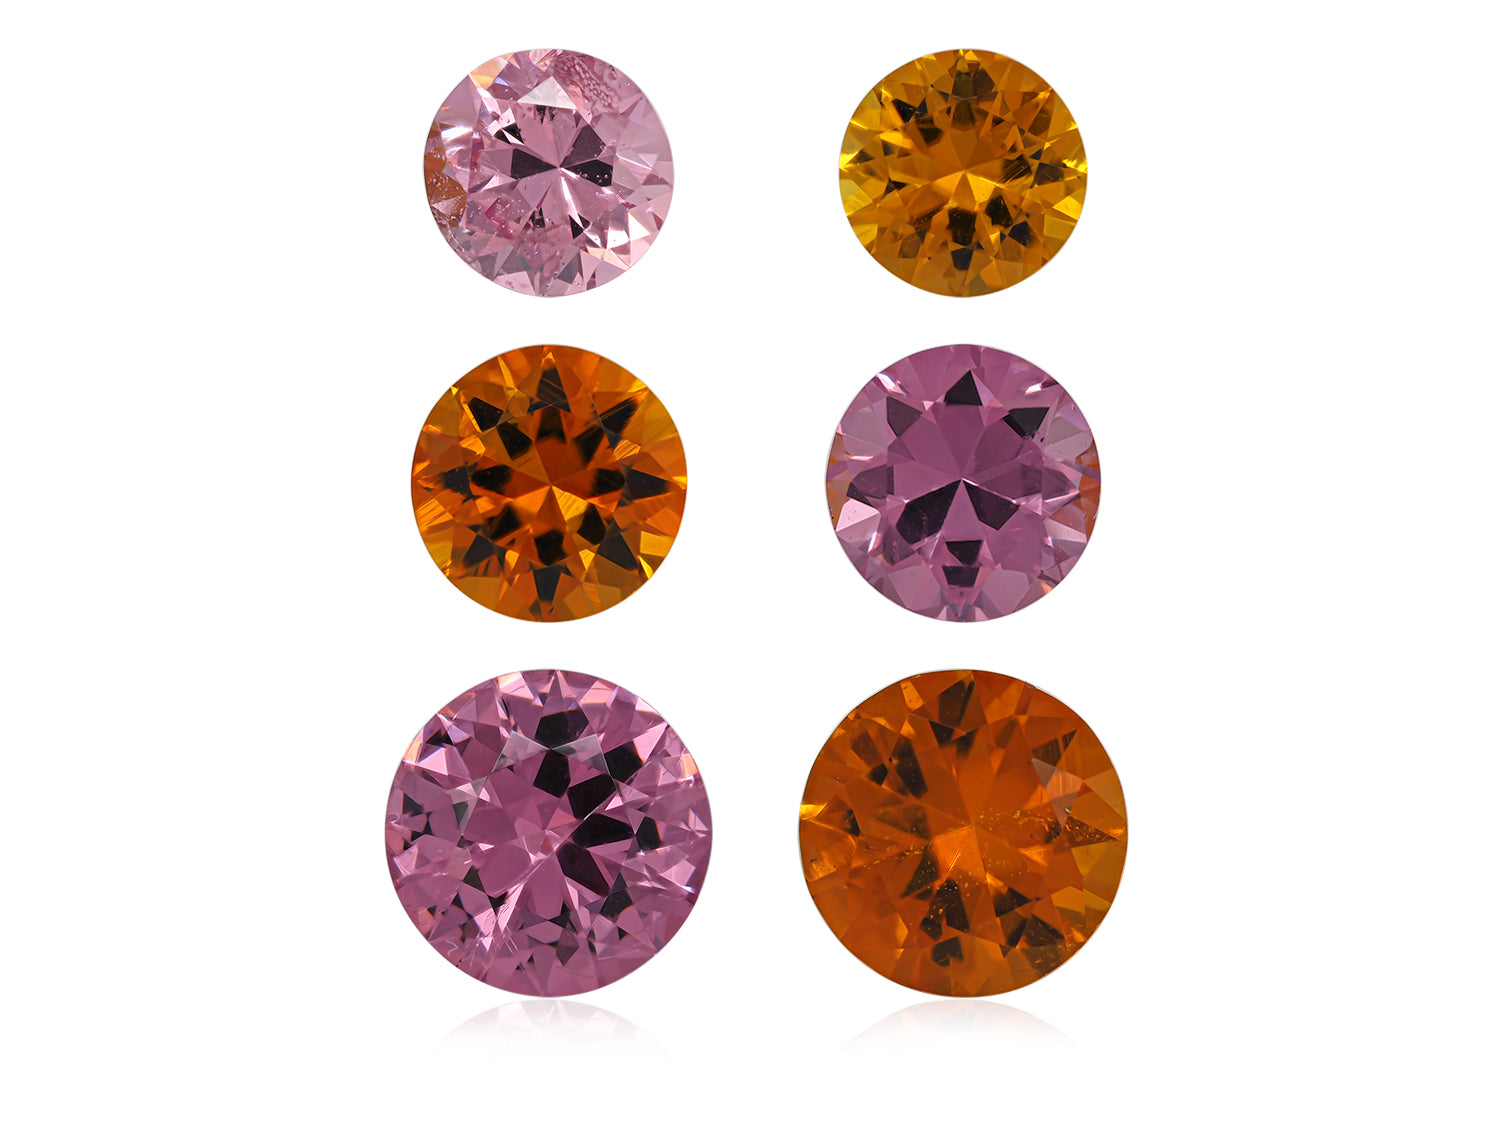 Earring Set Spinel & Clinohumite 5.63 CT / 6